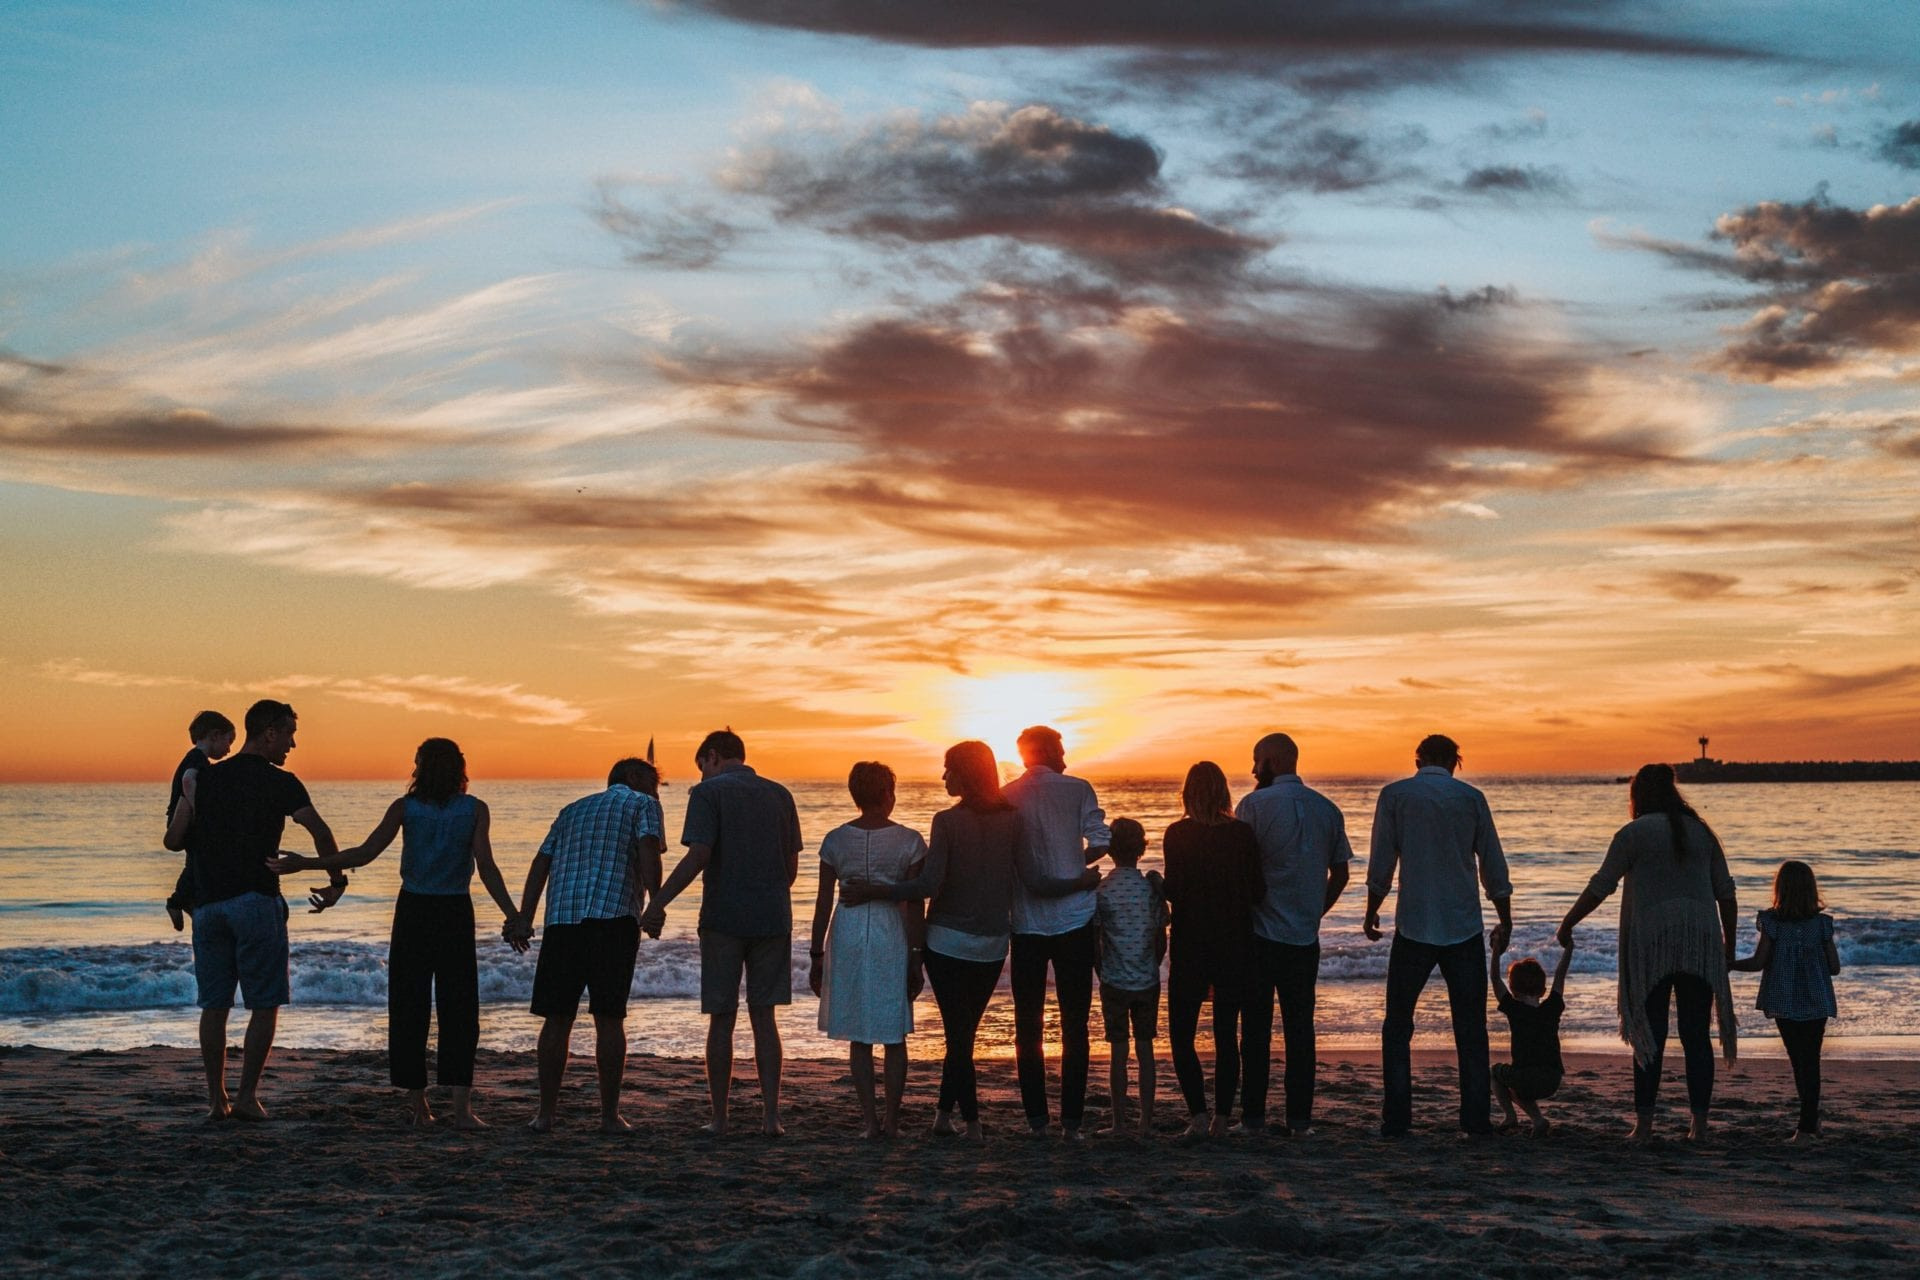 A group of people standing on the beach at sunset